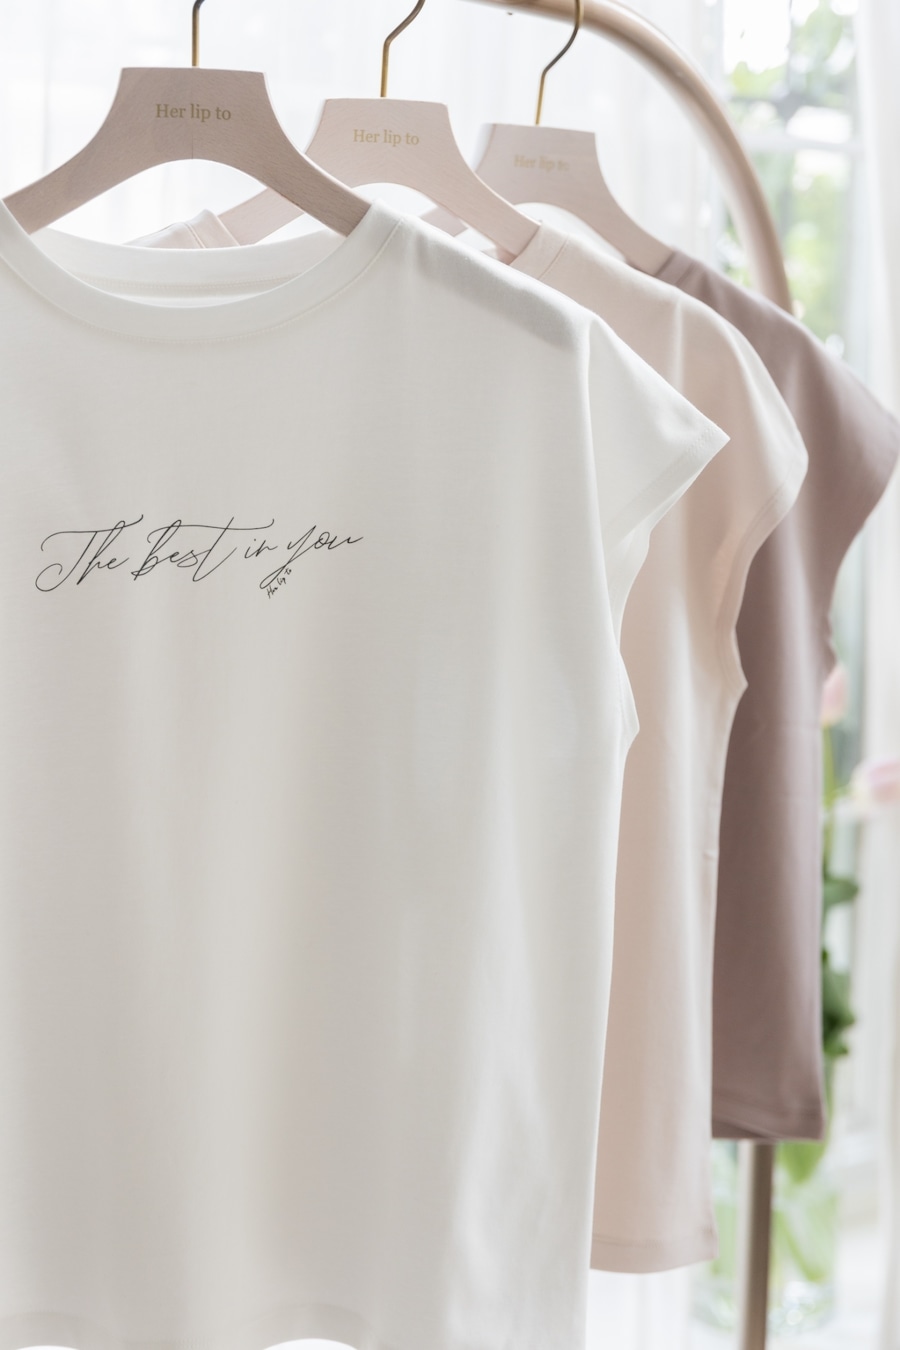 Tシャツ☆The Best in you Tee